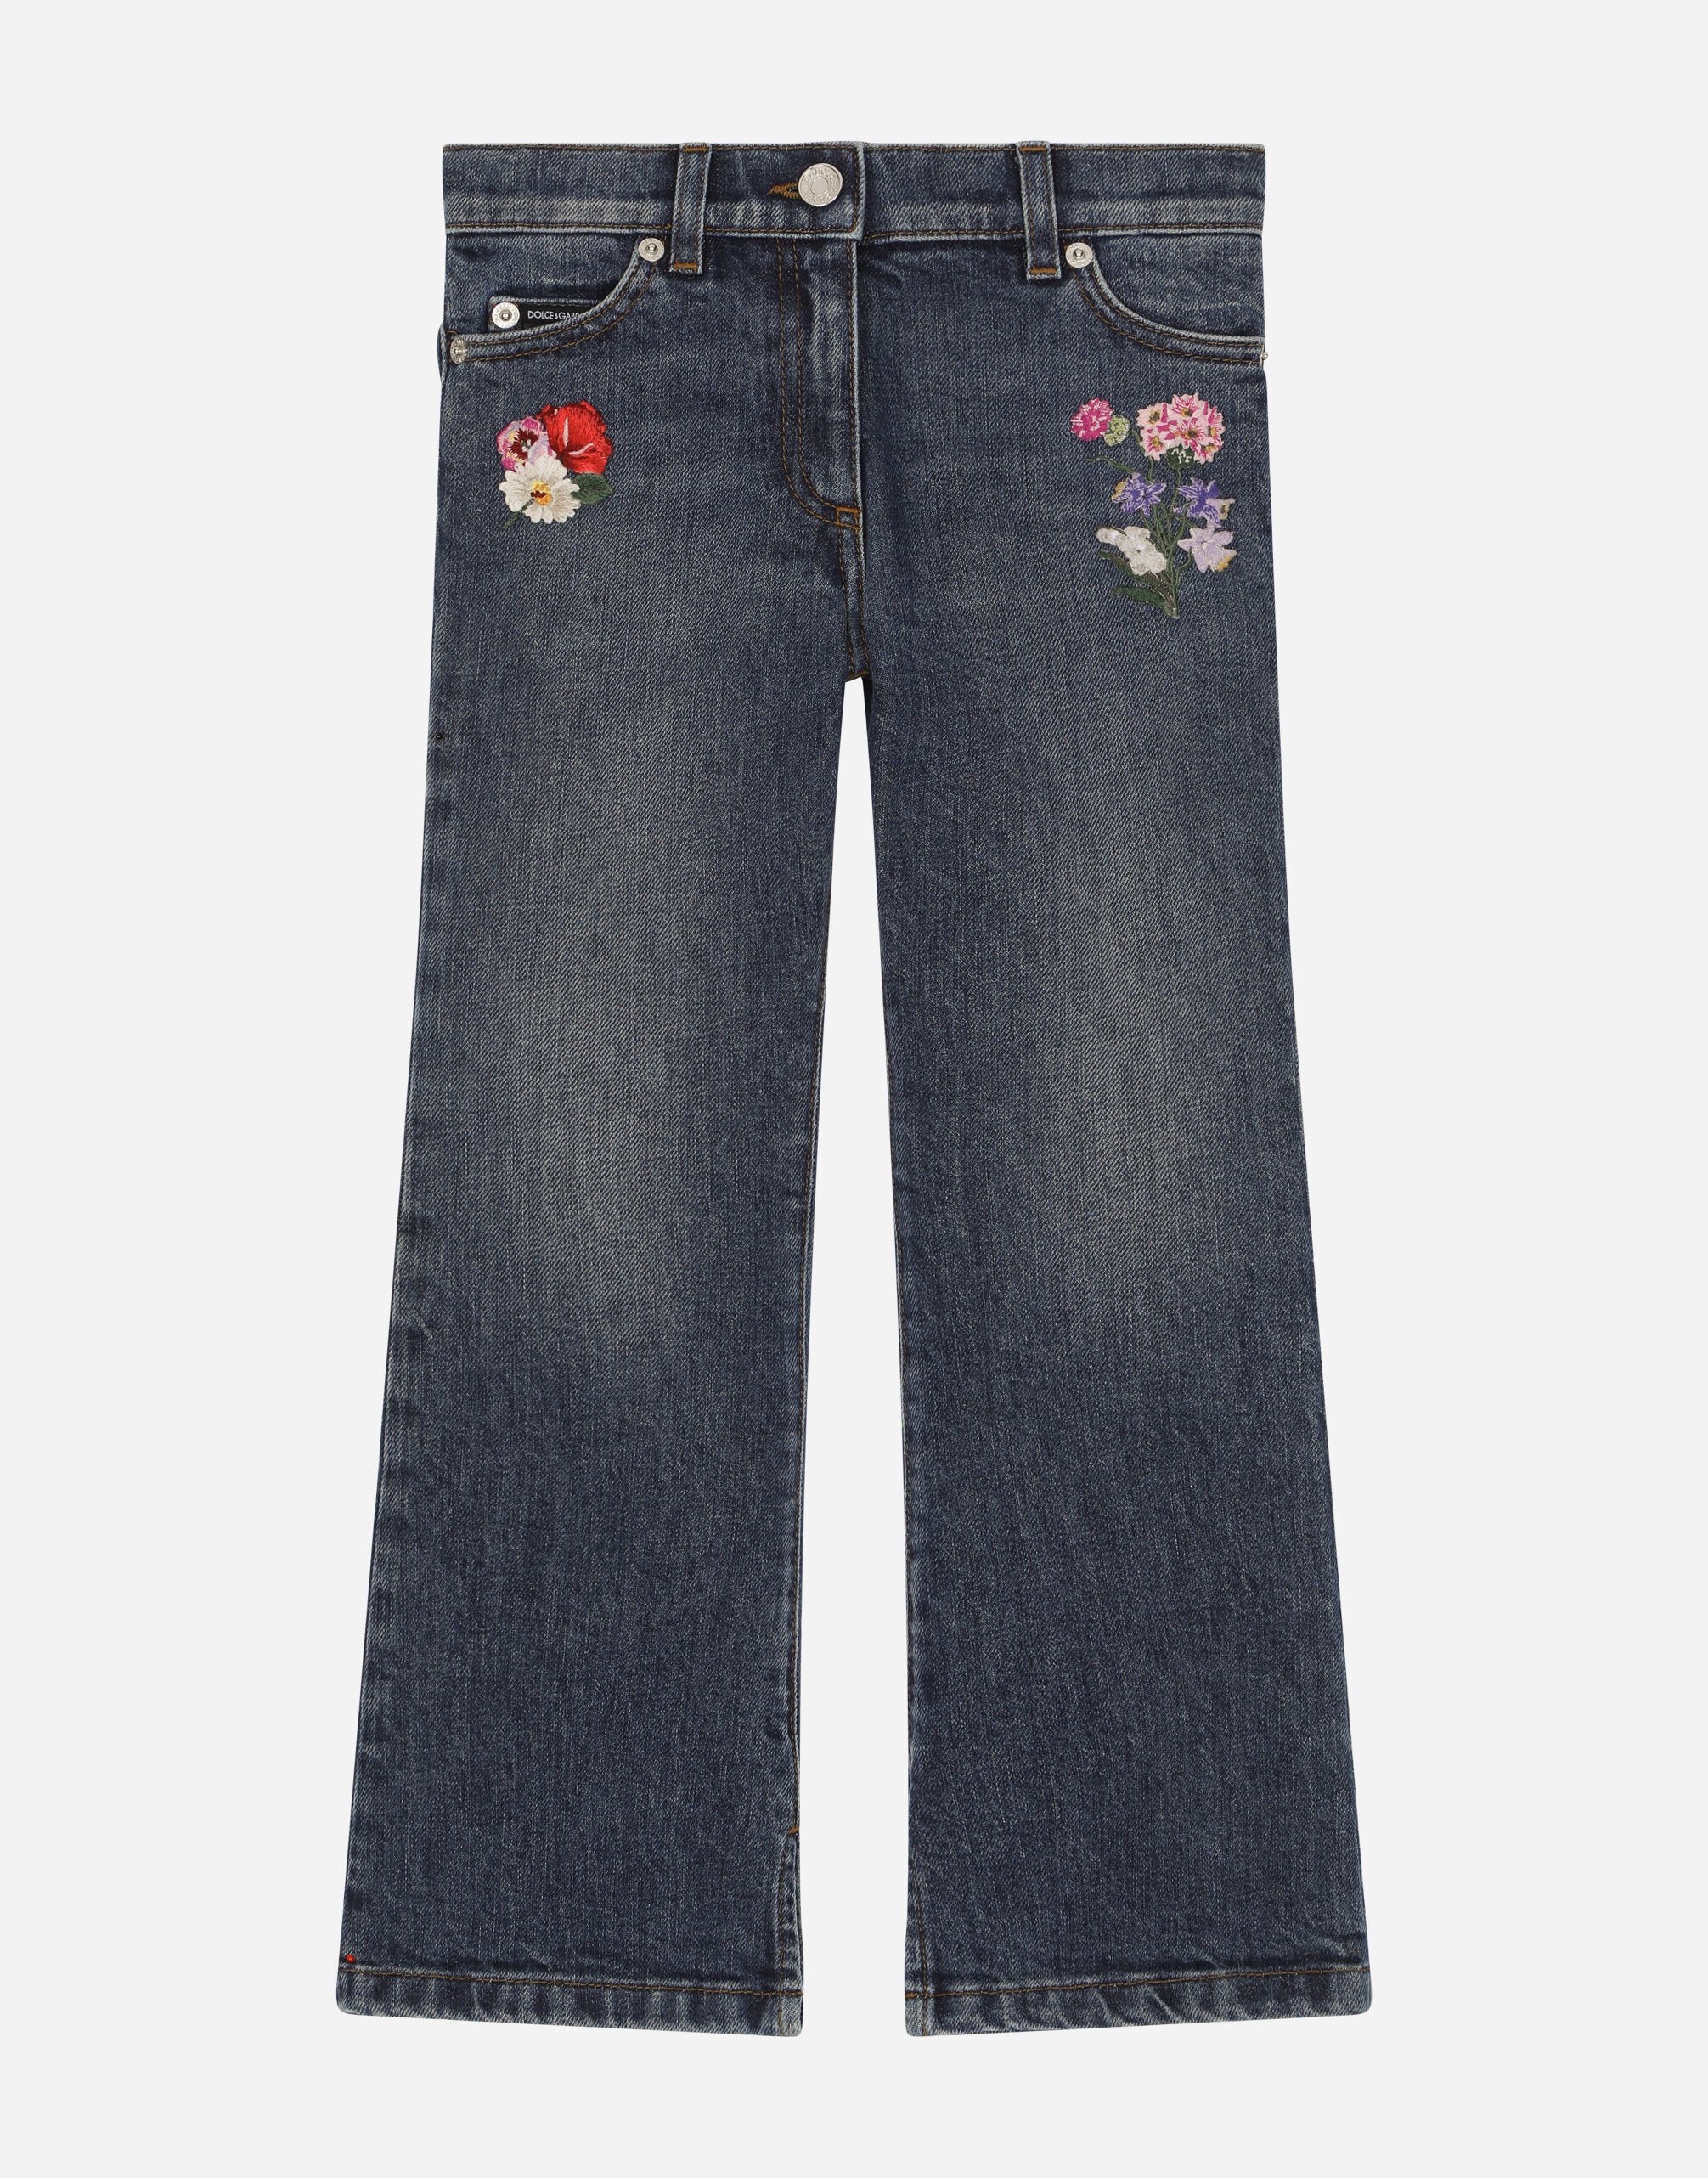 ${brand} 5-pocket denim pants with embroidery ${colorDescription} ${masterID}